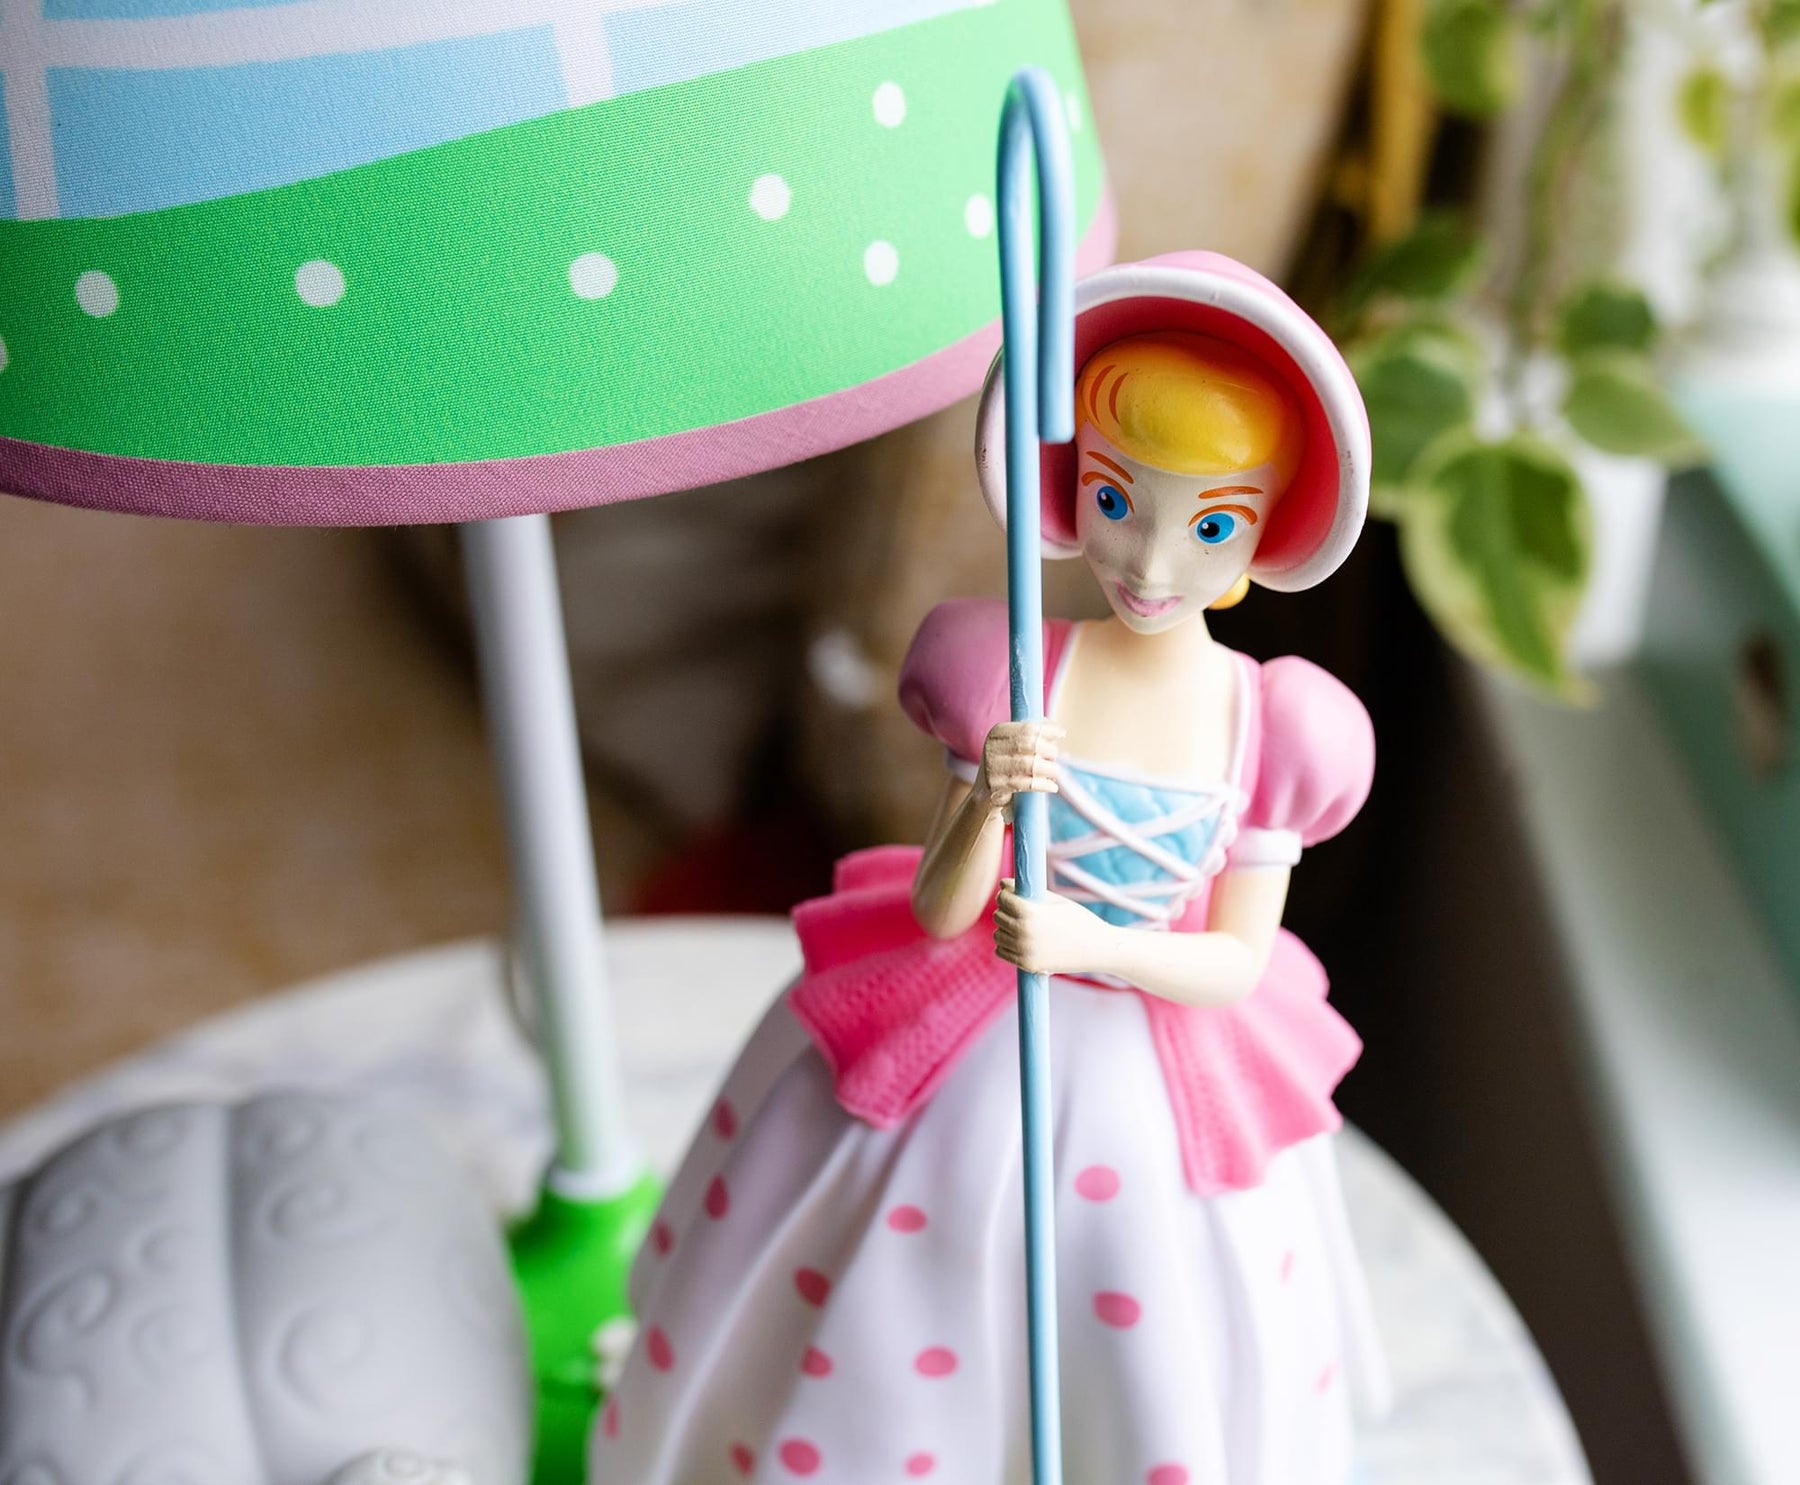 Disney Pixar Toy Story Bo Peep and Sheep Desk Lamp with Removable Figurine